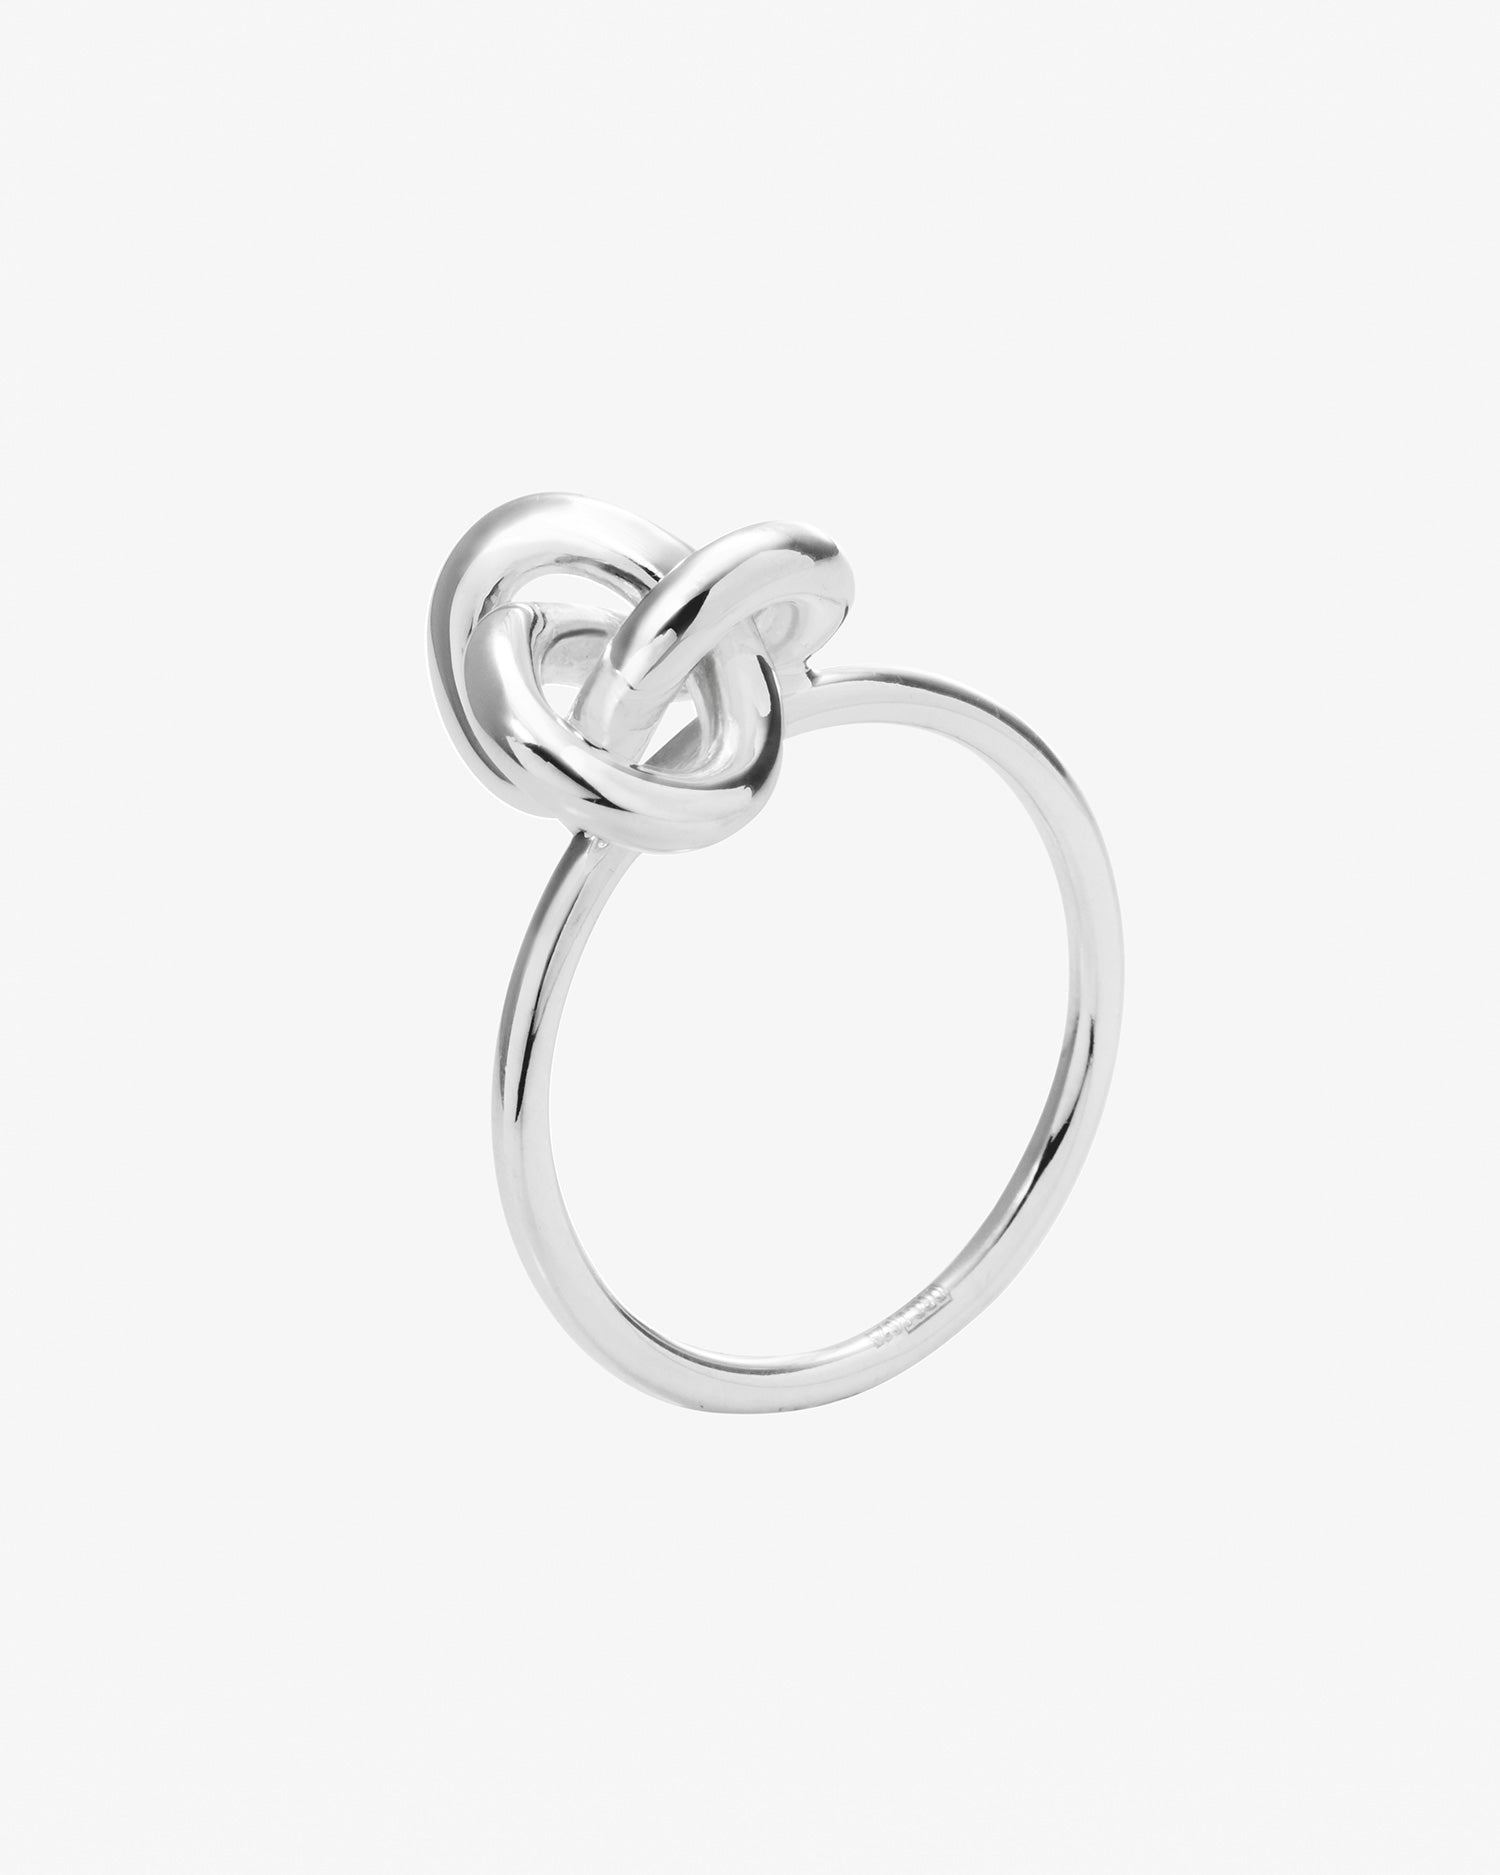 le-knot-ring-001